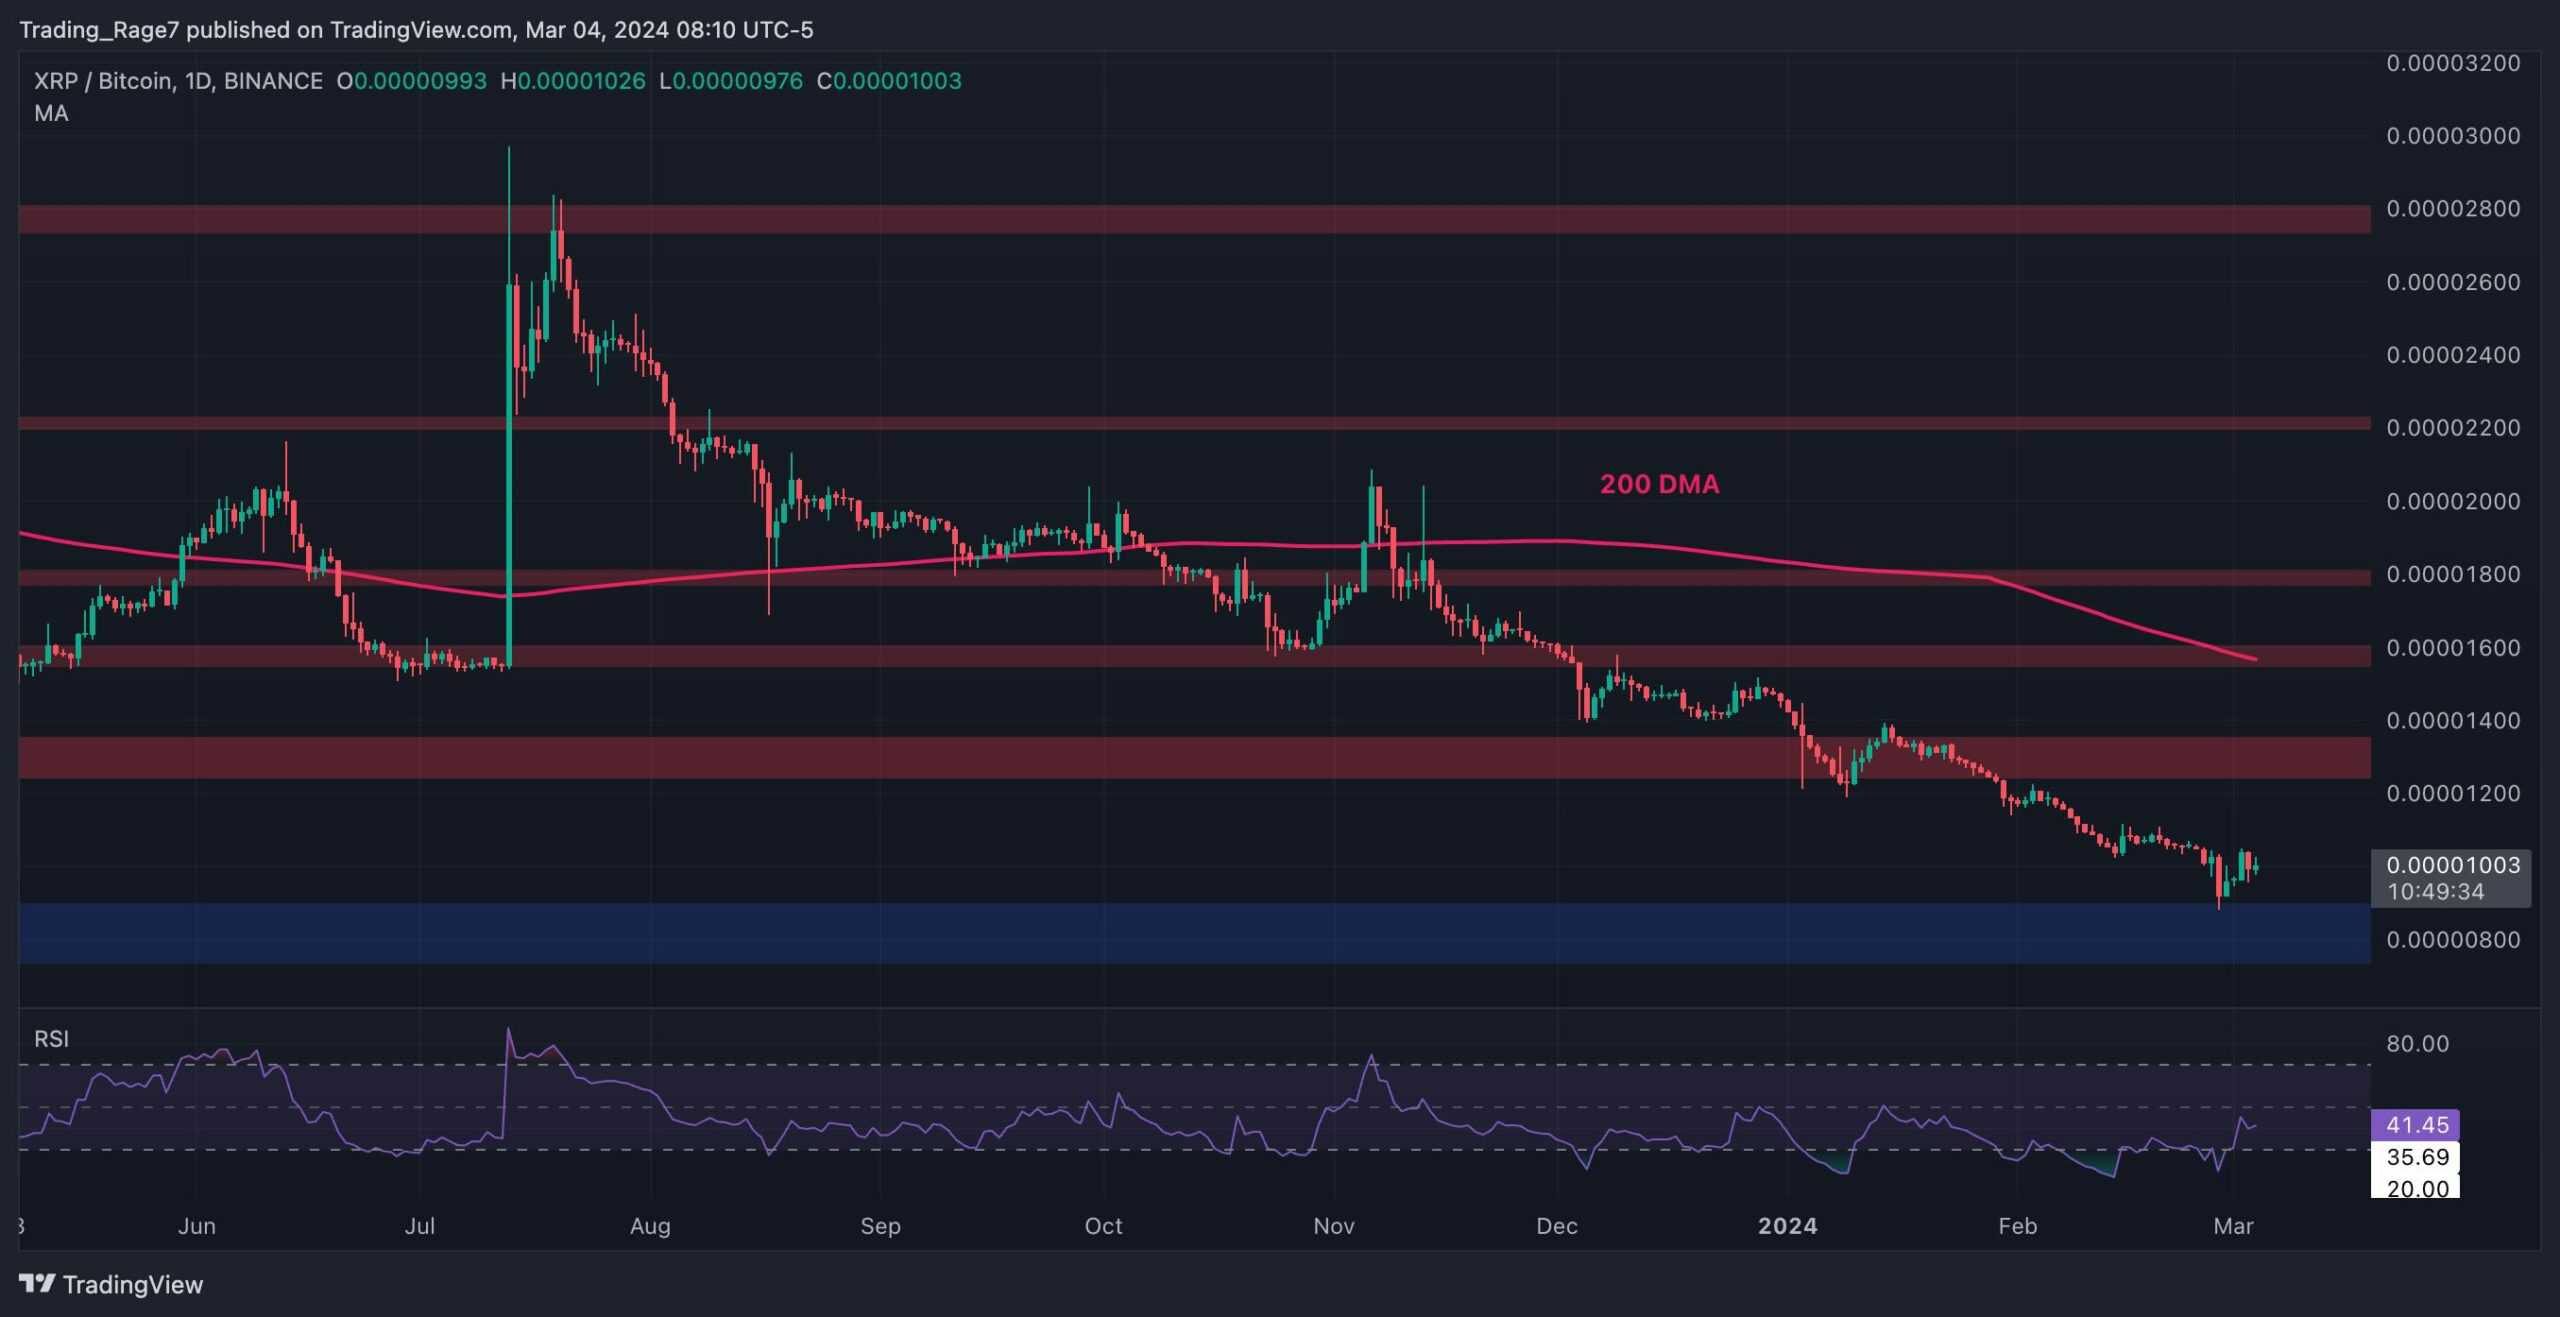 Traders-anticipate-an-xrp-bull-run-following-the-surge-to-$0.65-(ripple-price-analysis)